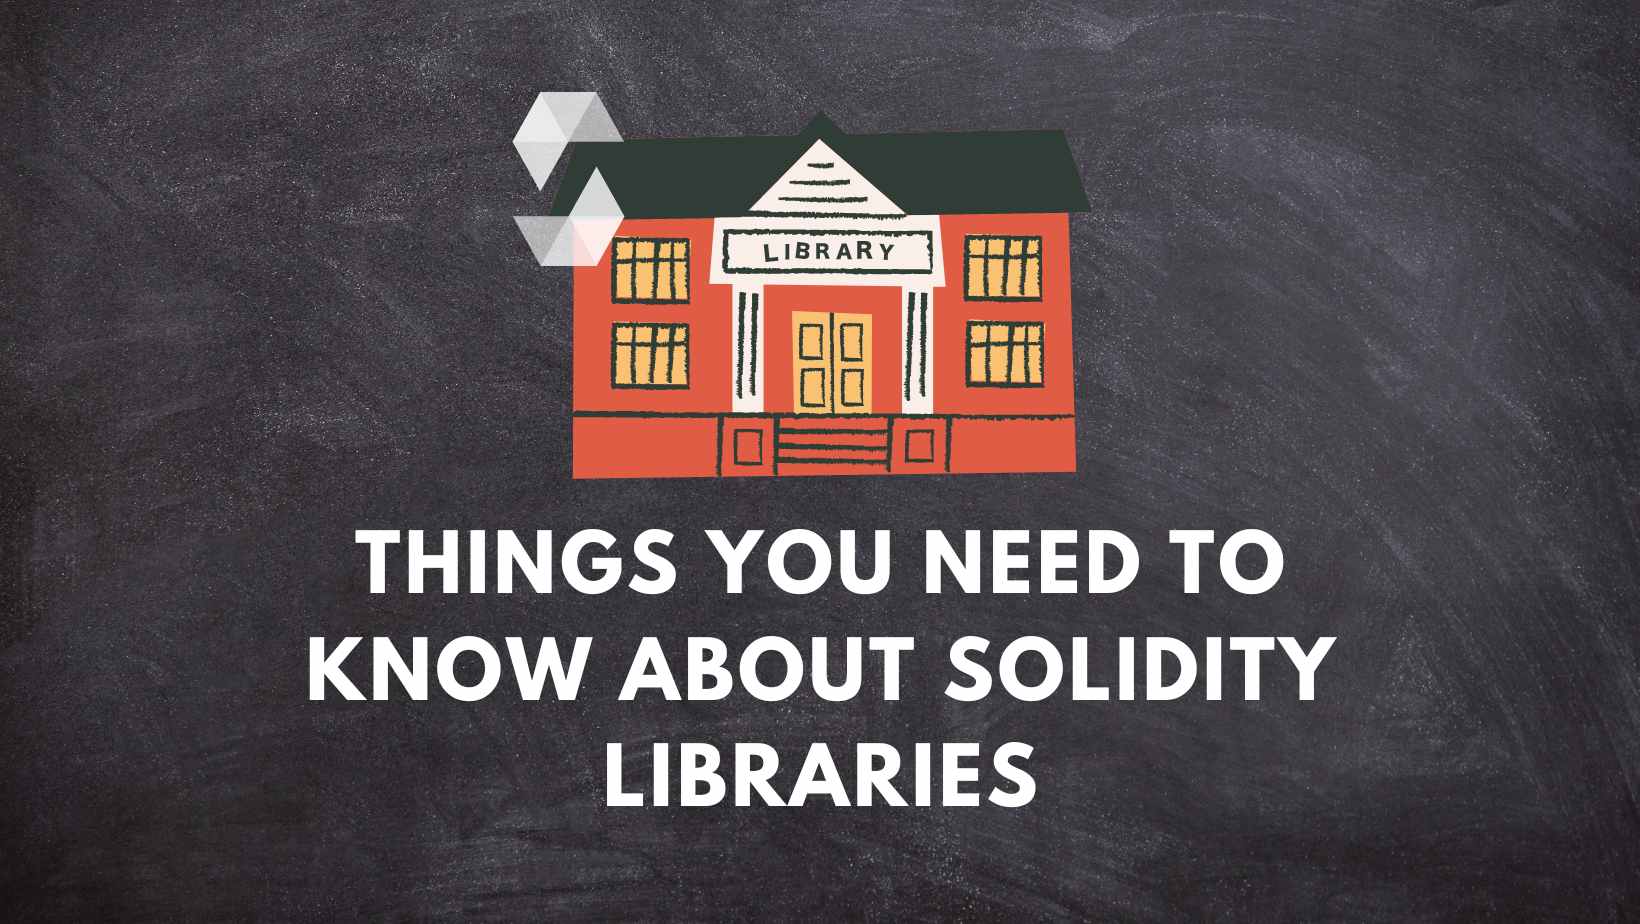 Things You Need to Know About Solidity Libraries